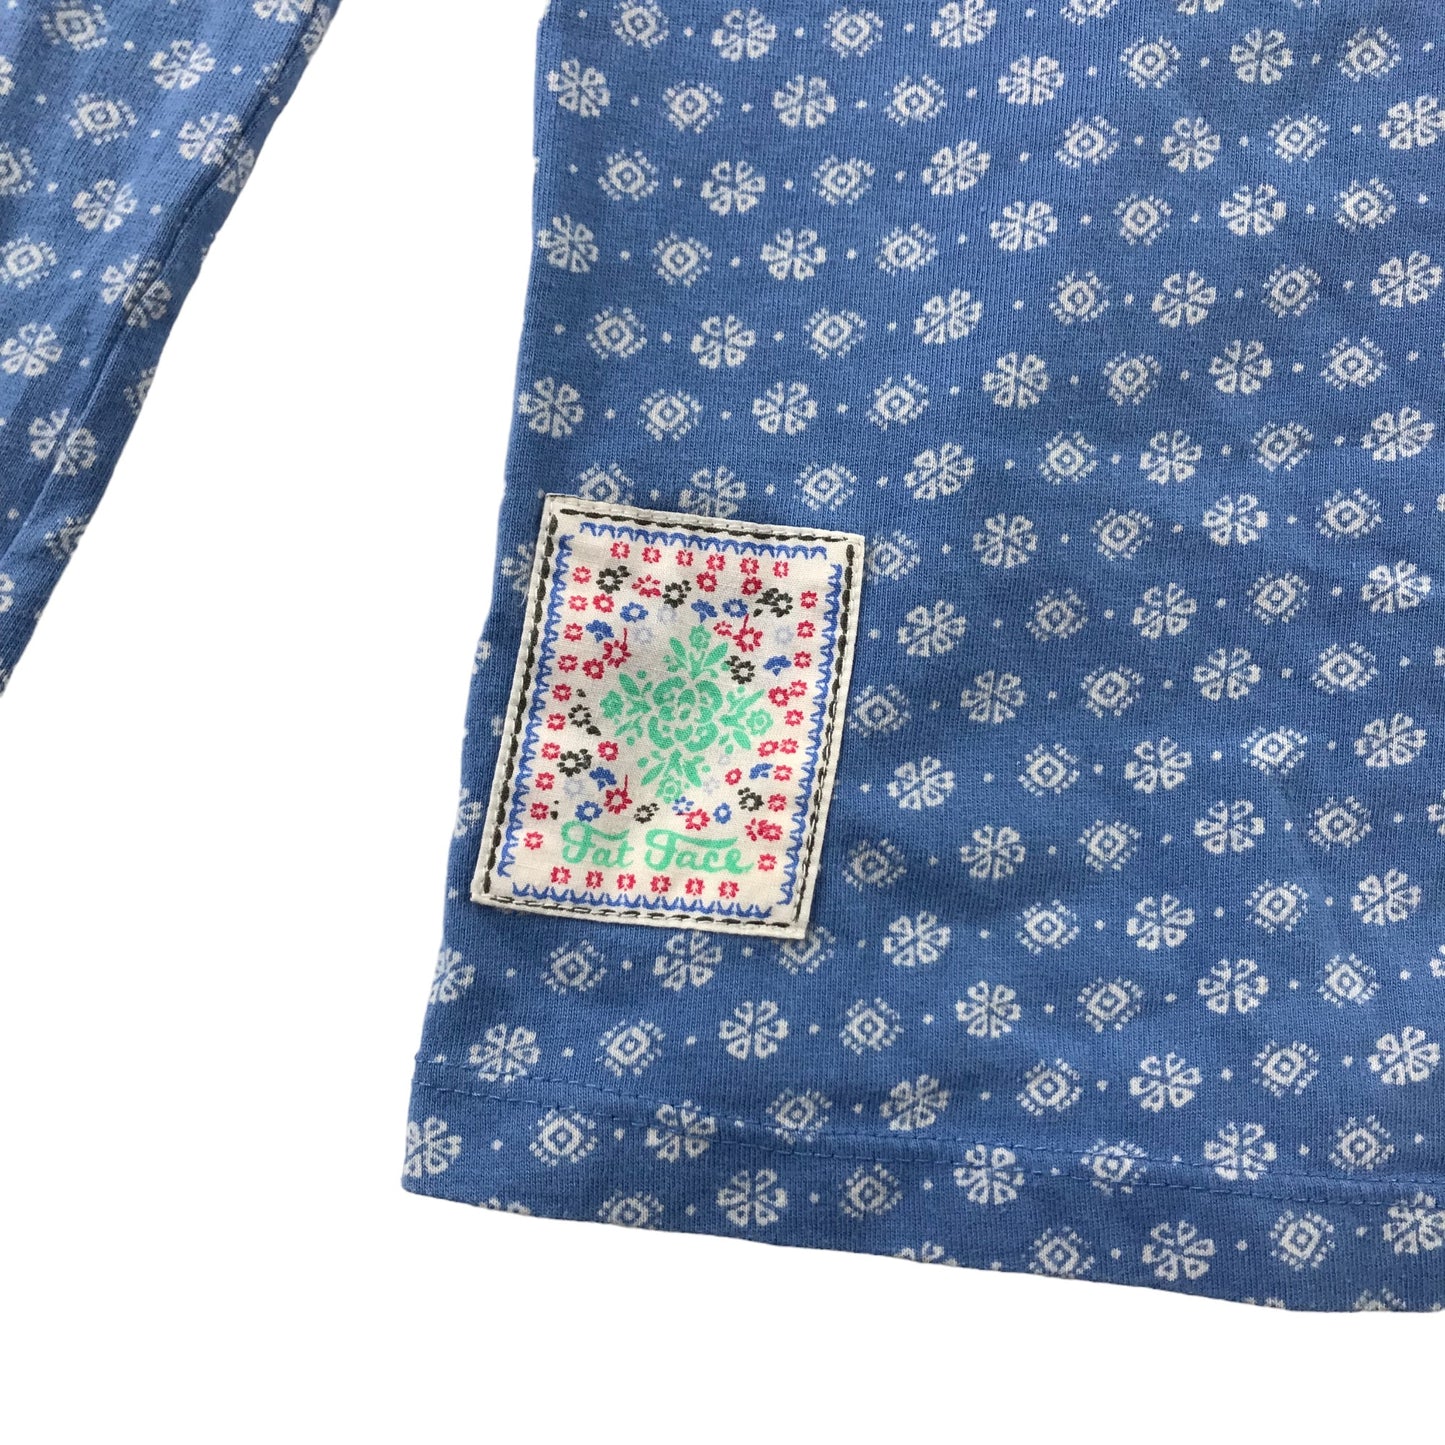 Fatface Blouse Age 10 Blue Long Sleeve Floral Embroidered Cotton